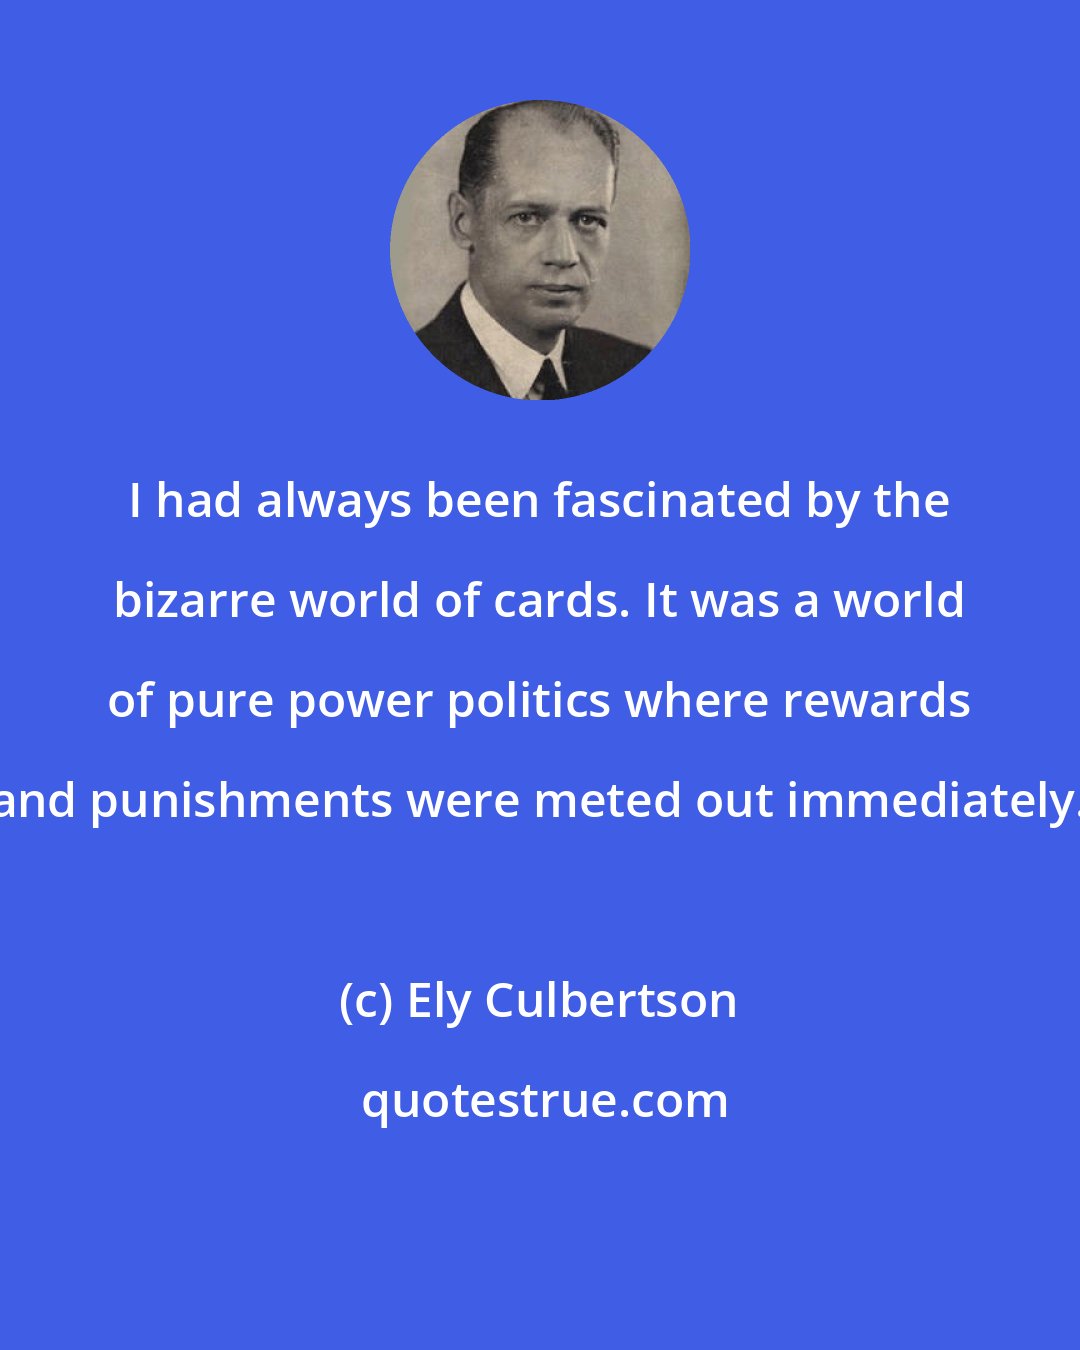 Ely Culbertson: I had always been fascinated by the bizarre world of cards. It was a world of pure power politics where rewards and punishments were meted out immediately.